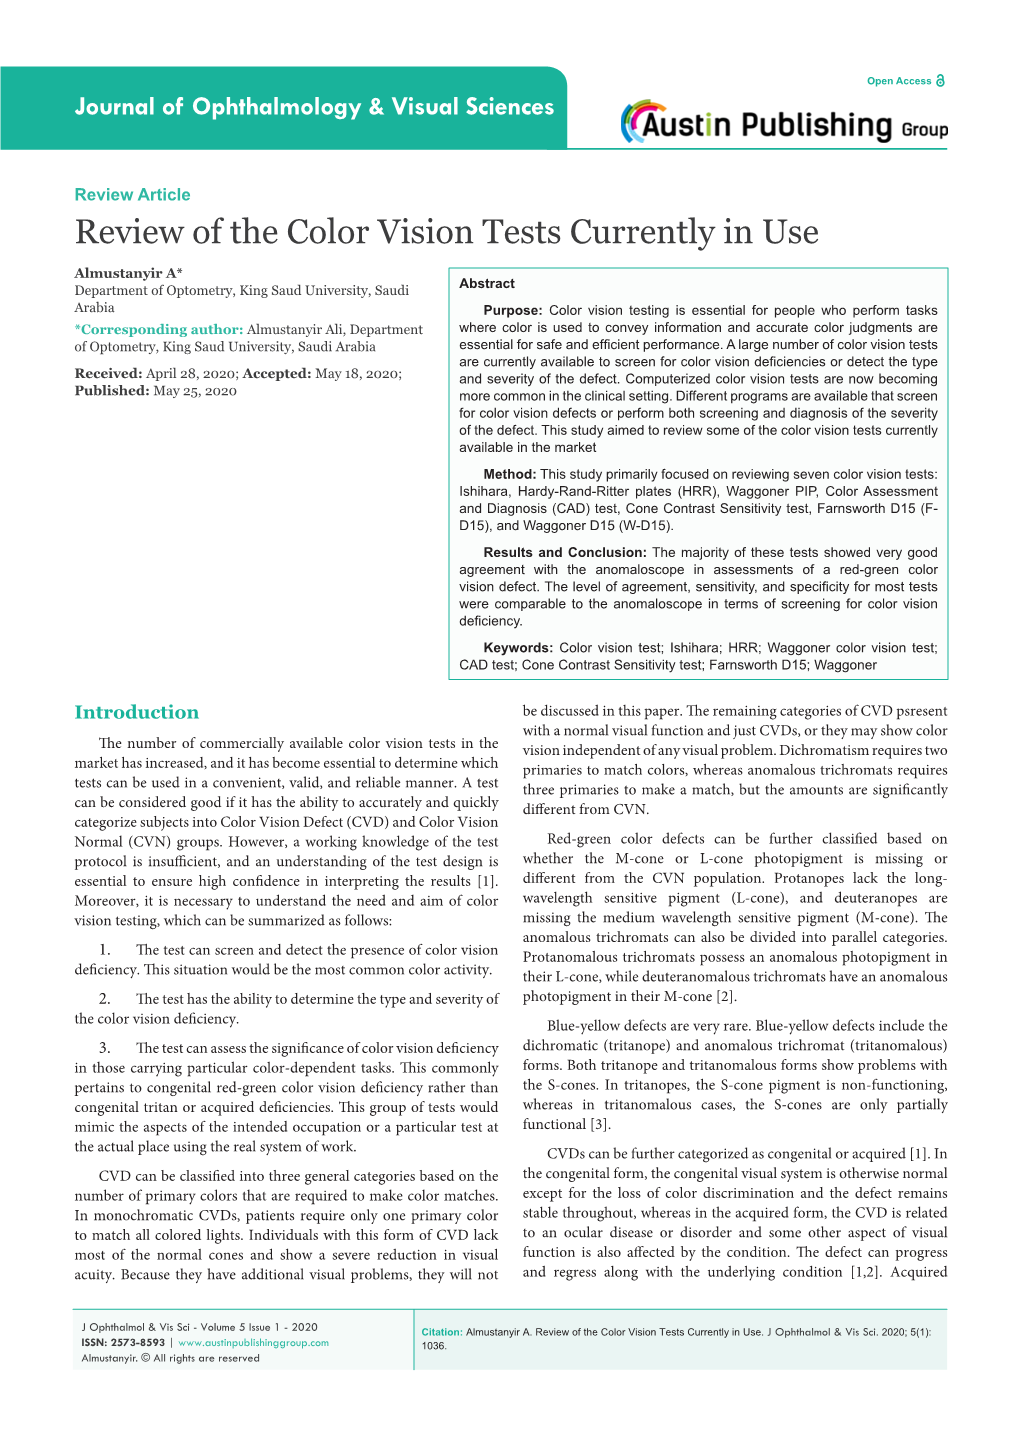 Review of the Color Vision Tests Currently in Use